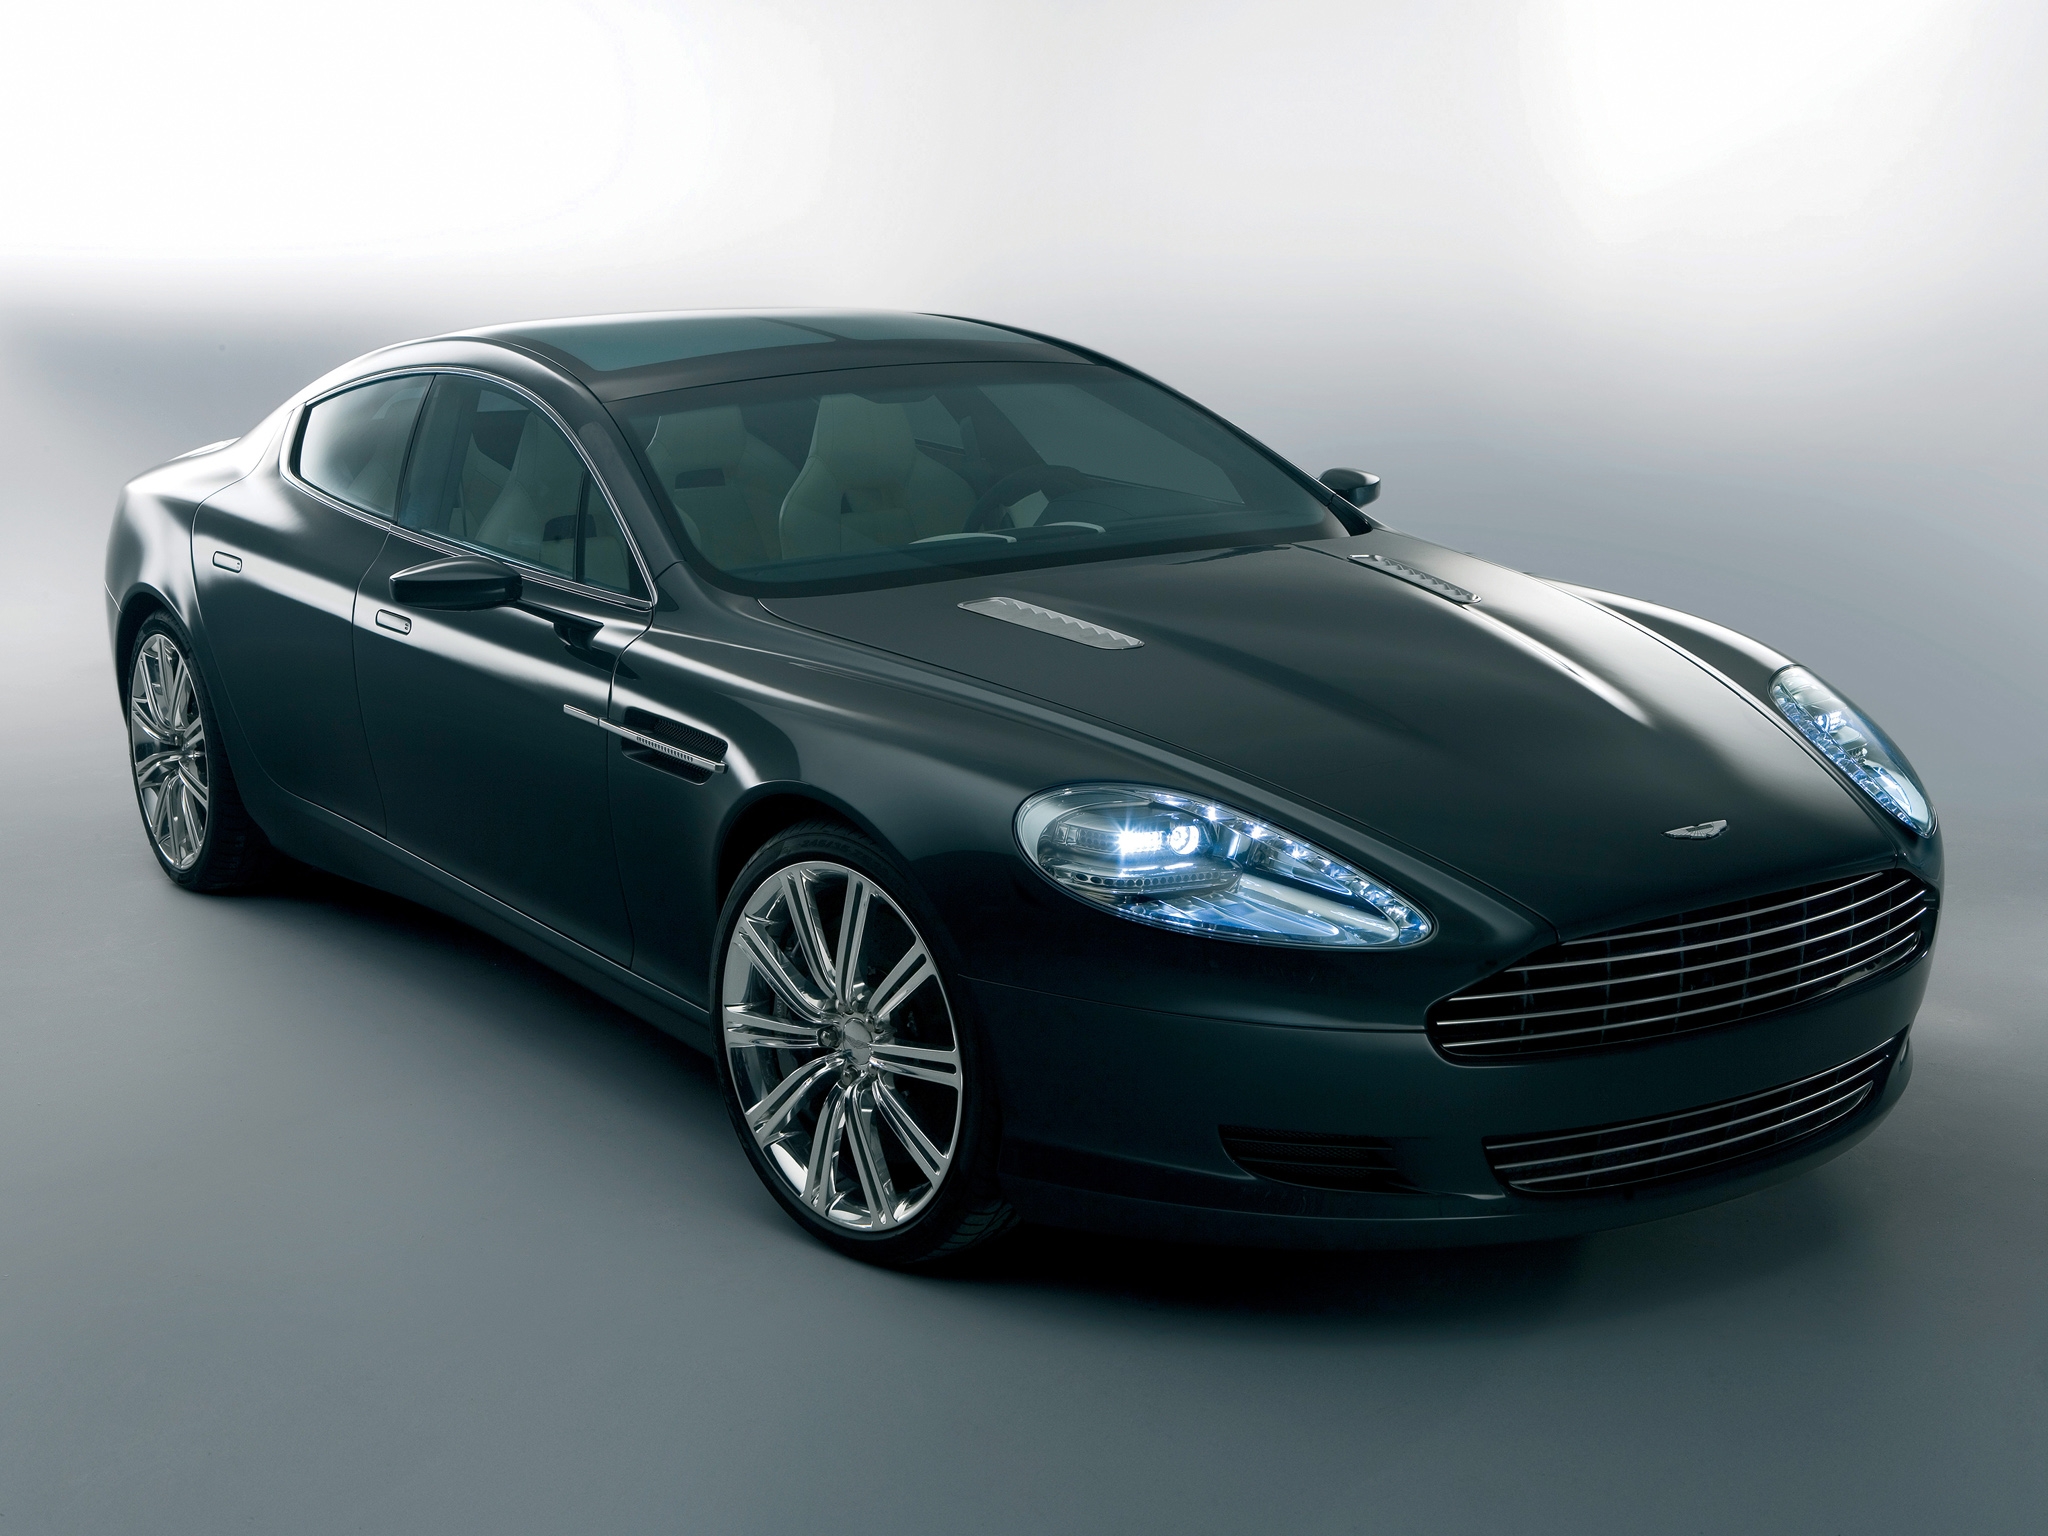 front view, aston martin, cars, black, style, concept car, 2006, rapide